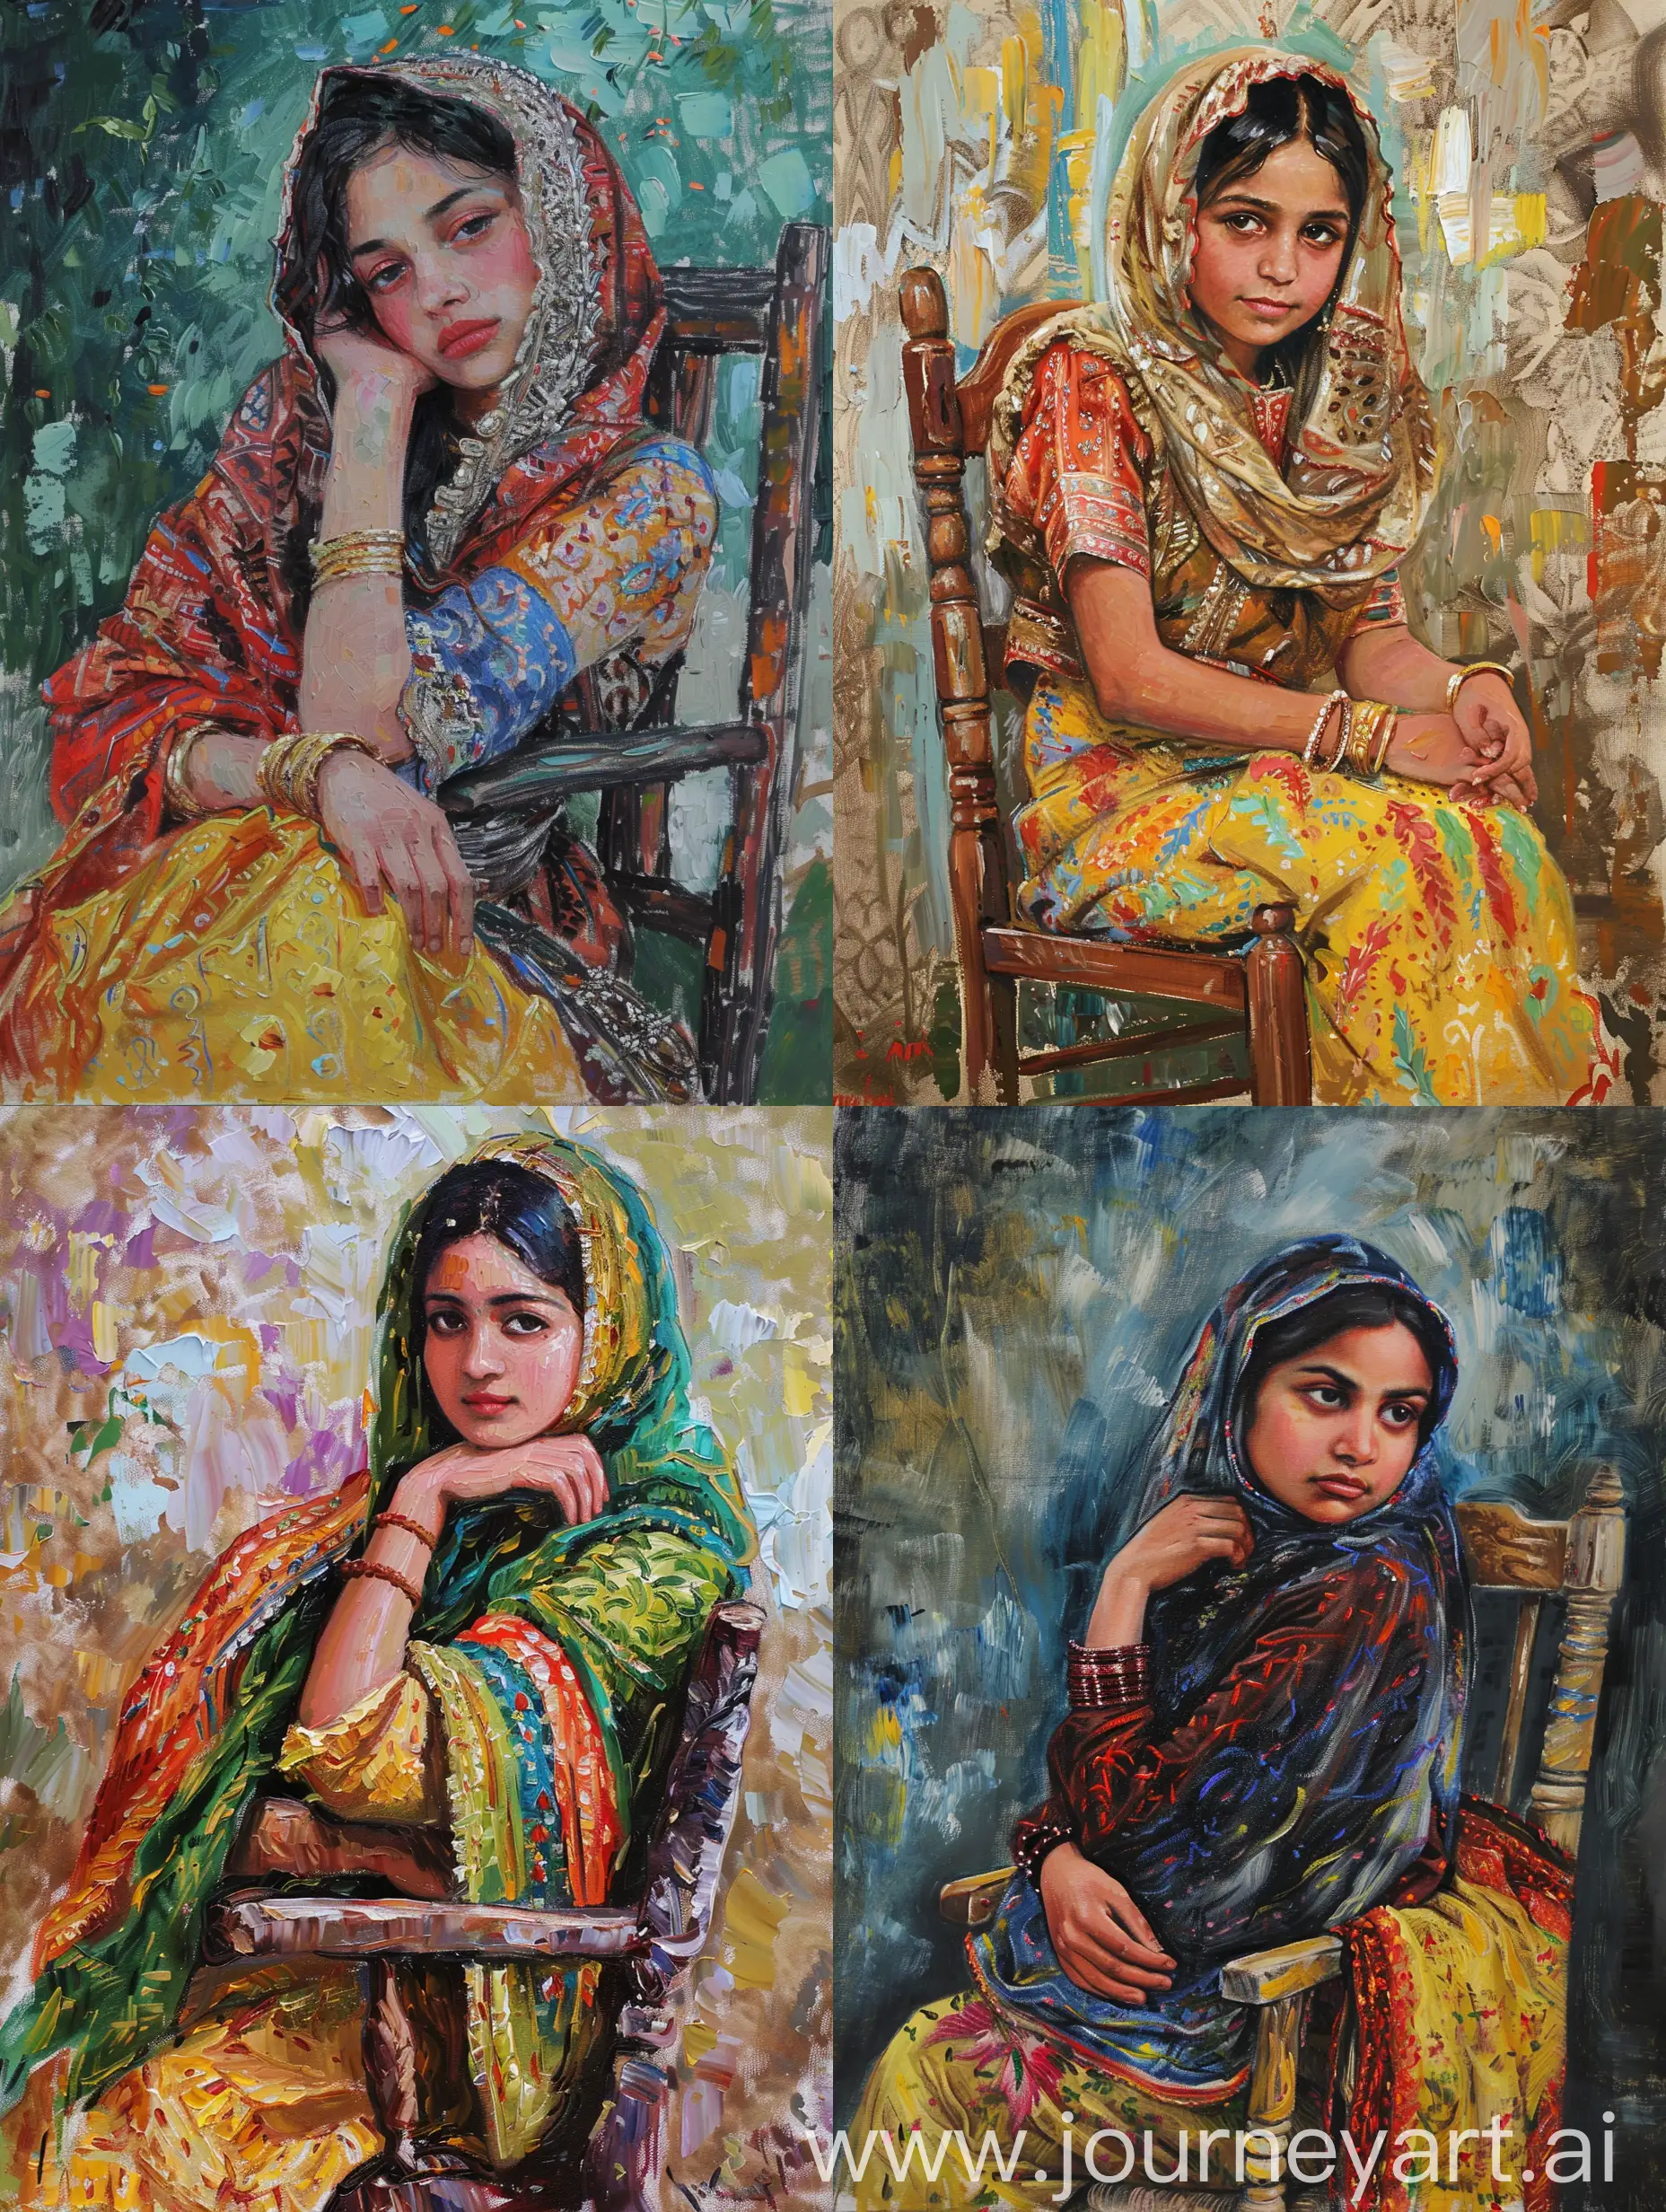 Oil-Painting-of-Kashmiri-Girl-in-Traditional-Outfit-Sitting-on-Chair-Van-Gogh-Style